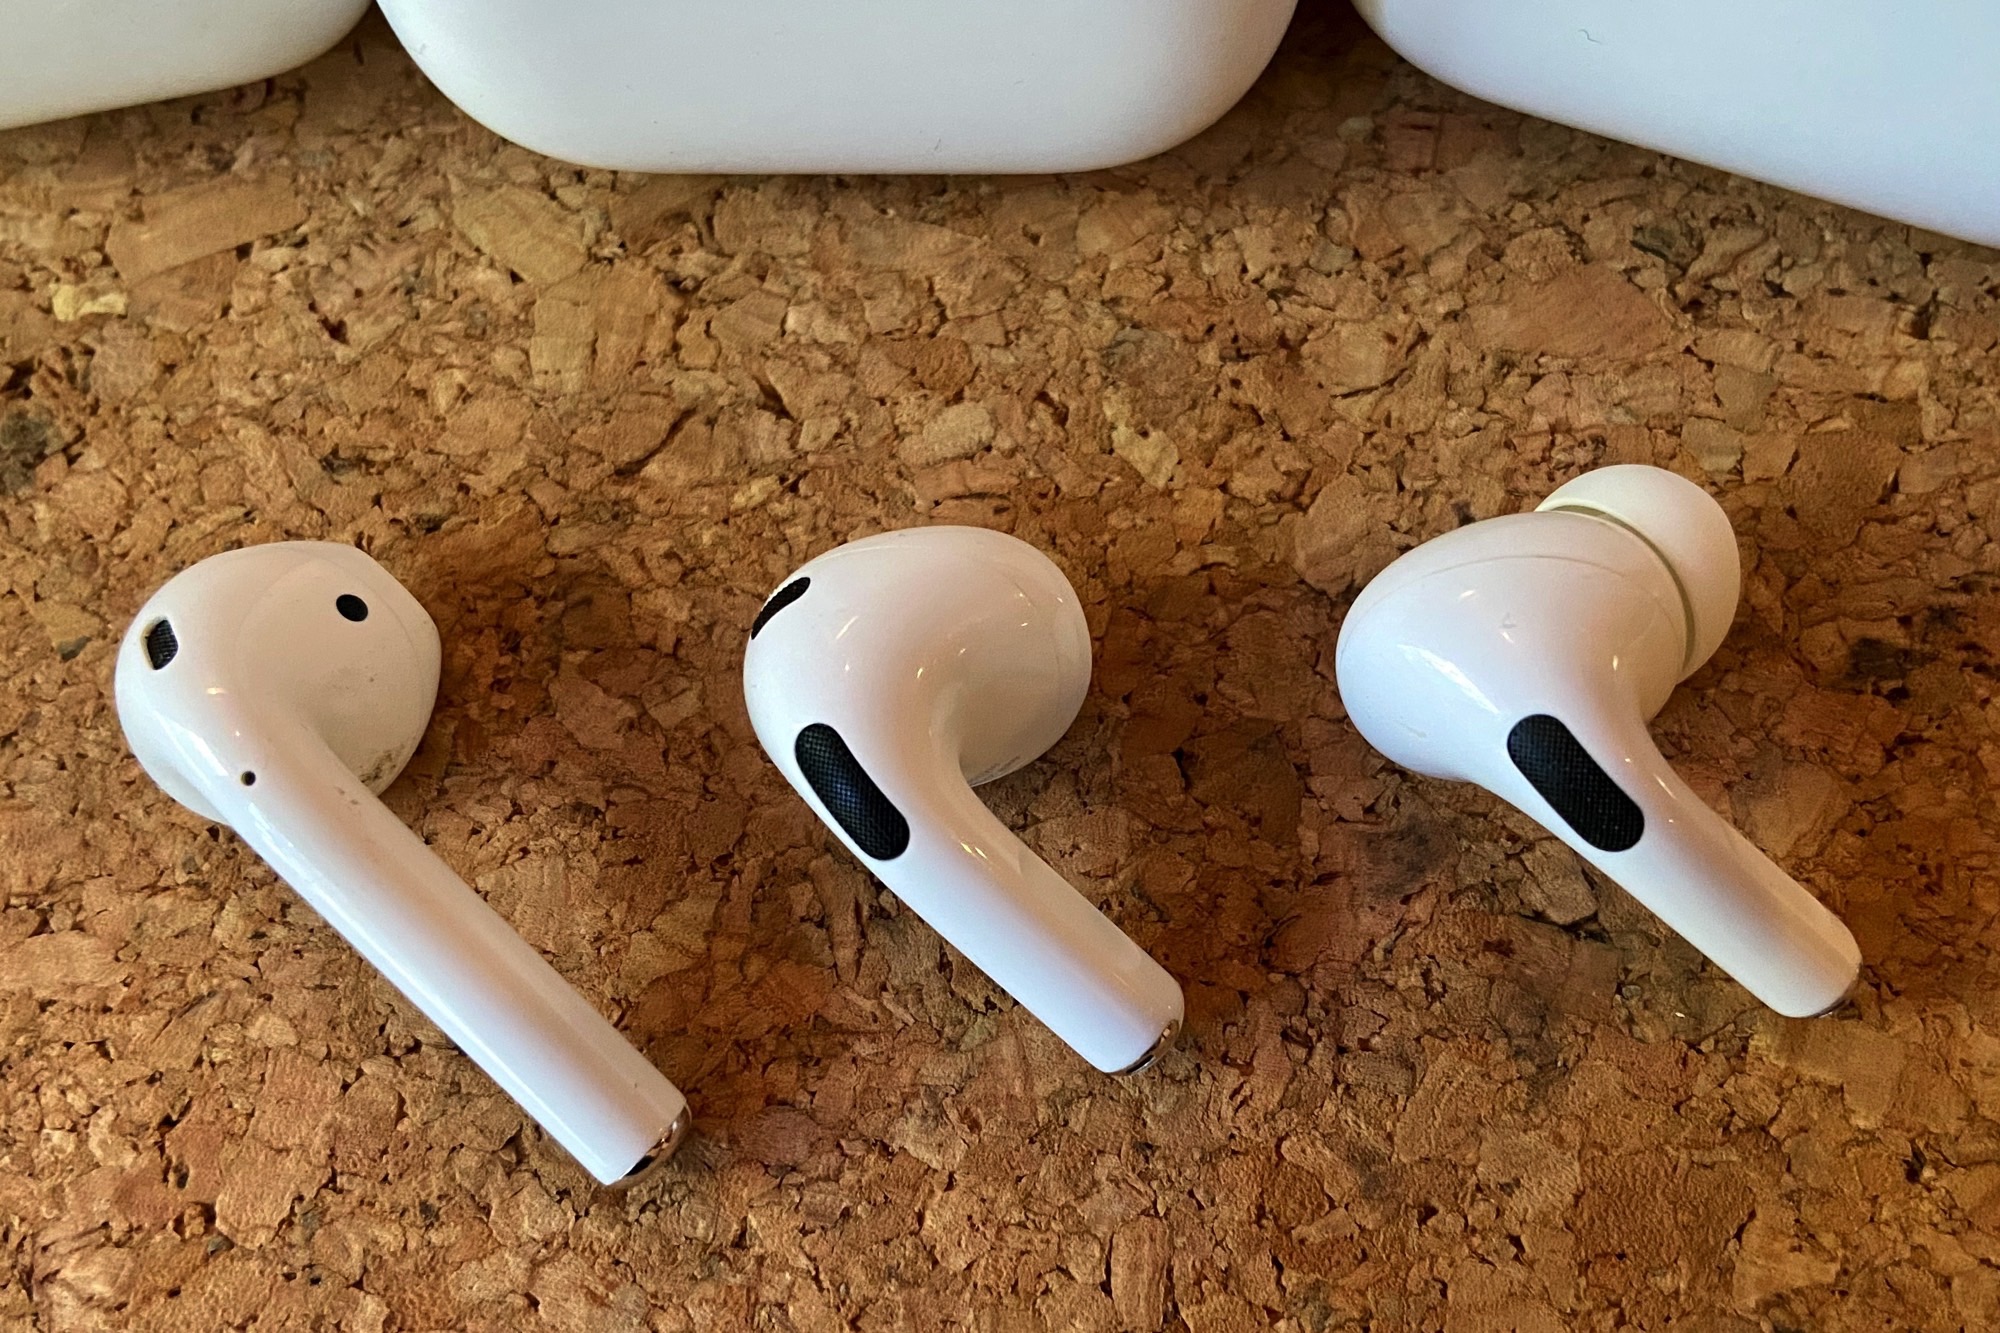 Pause, skip, and adjust volume with your AirPods and AirPods Pro - Apple  Support